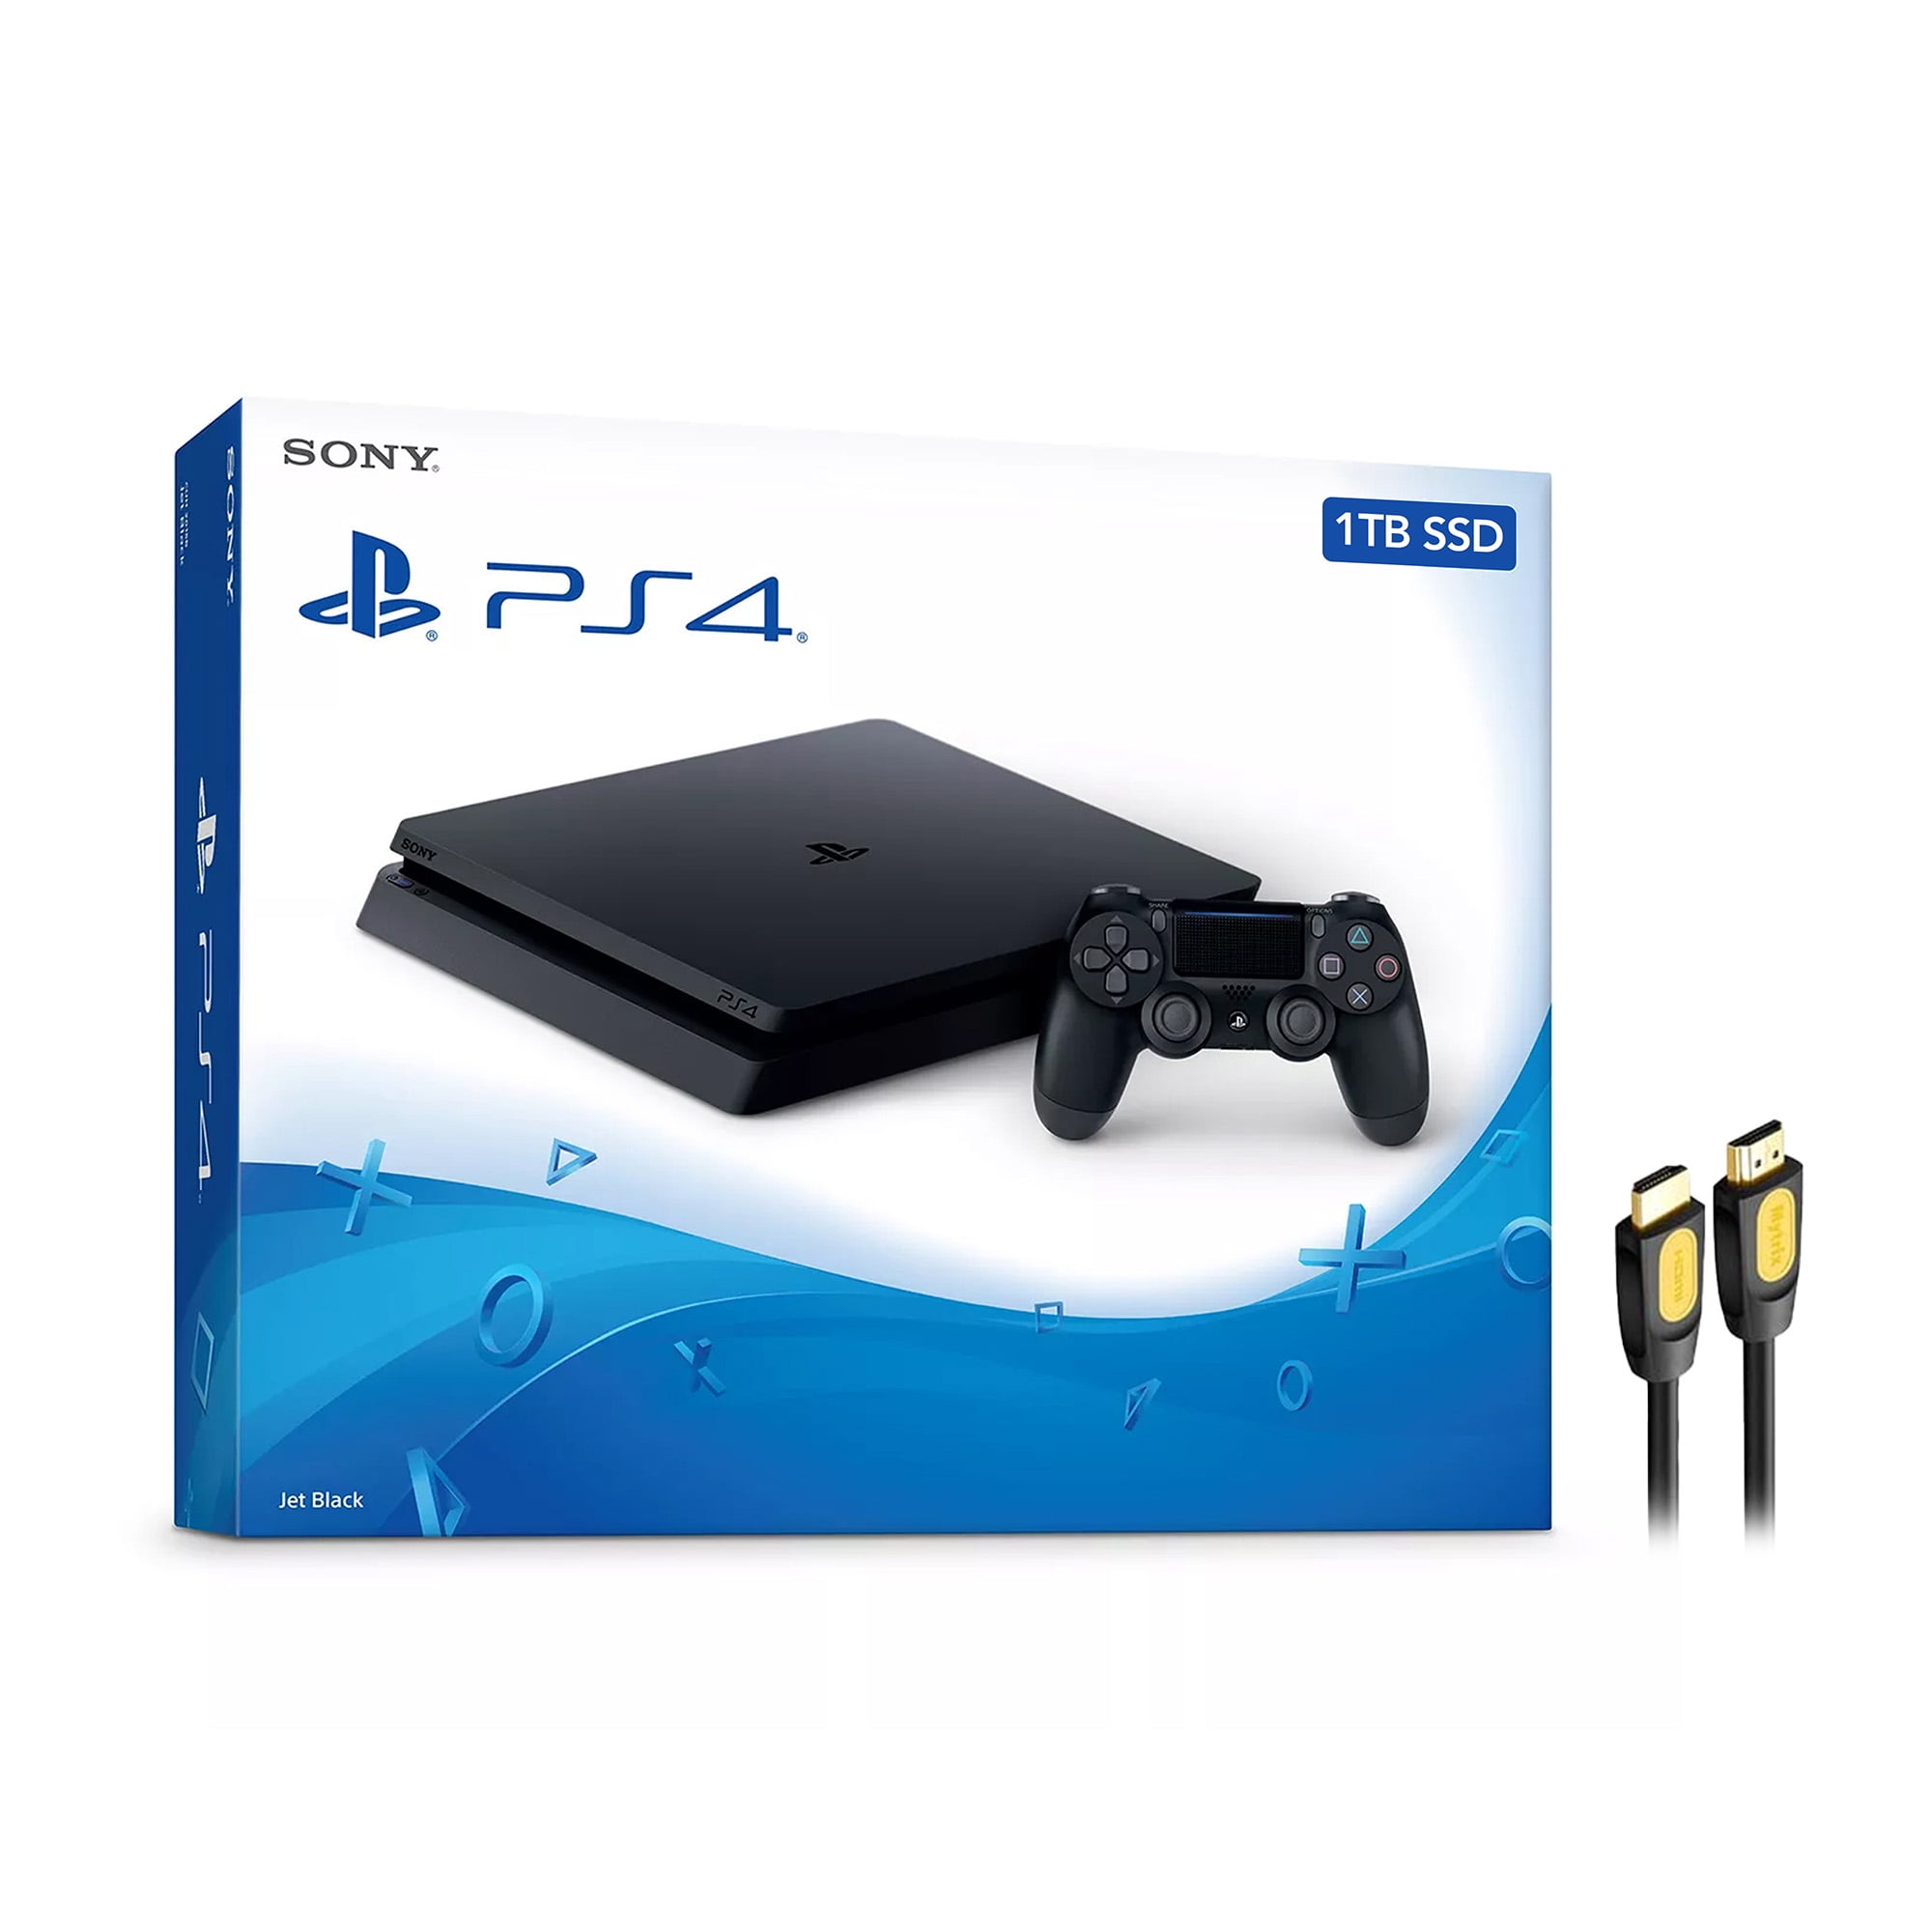 Sony Playstation 4 Slim Video Game Console 500GB Jet Black PS4